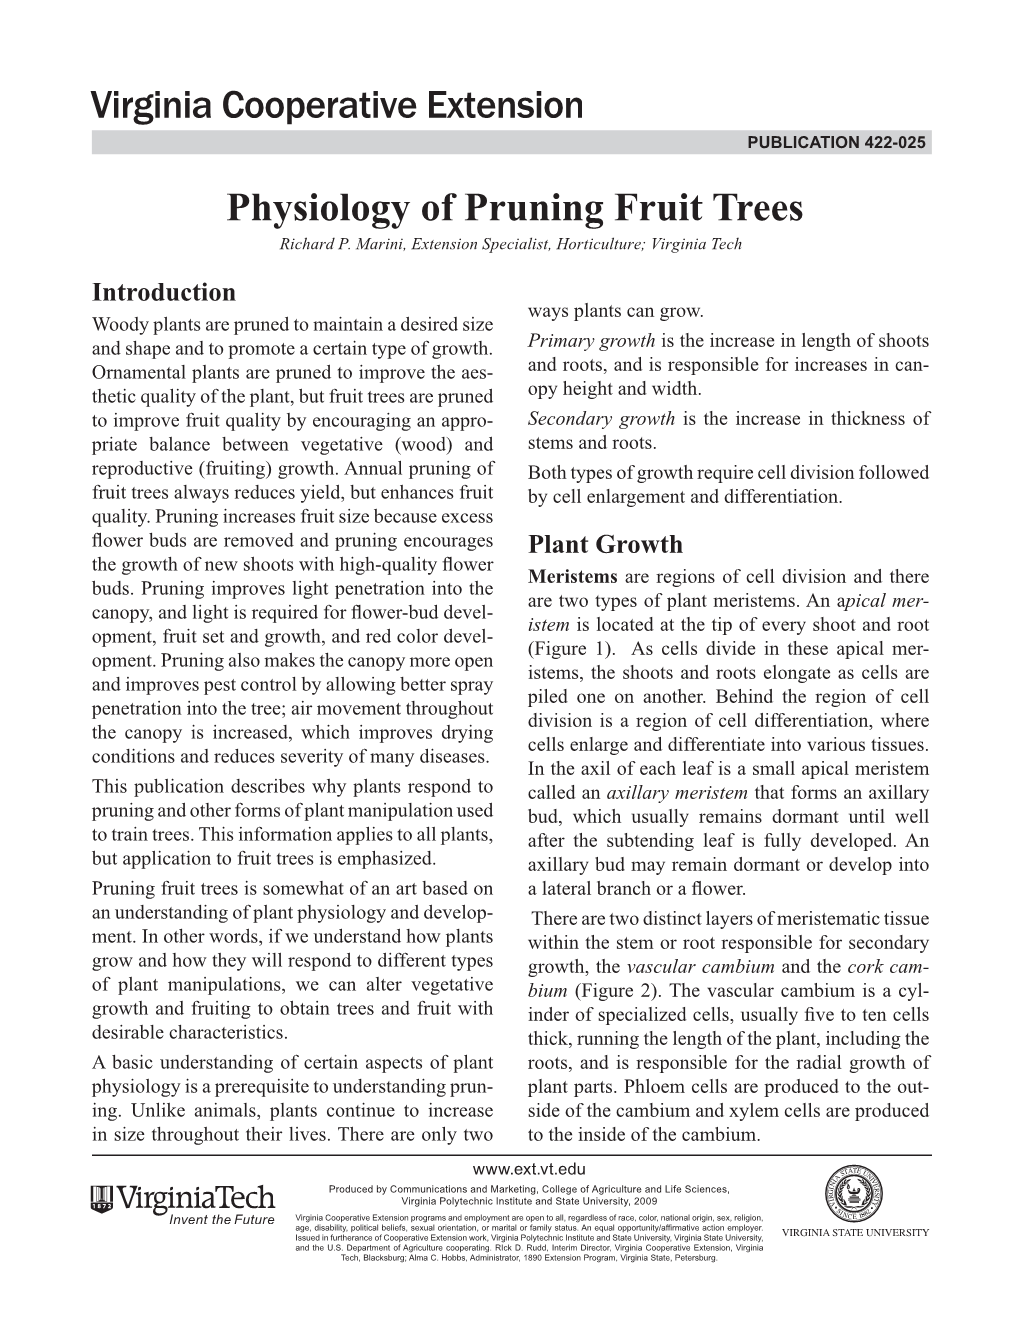 Physiology of Pruning Fruit Trees Richard P